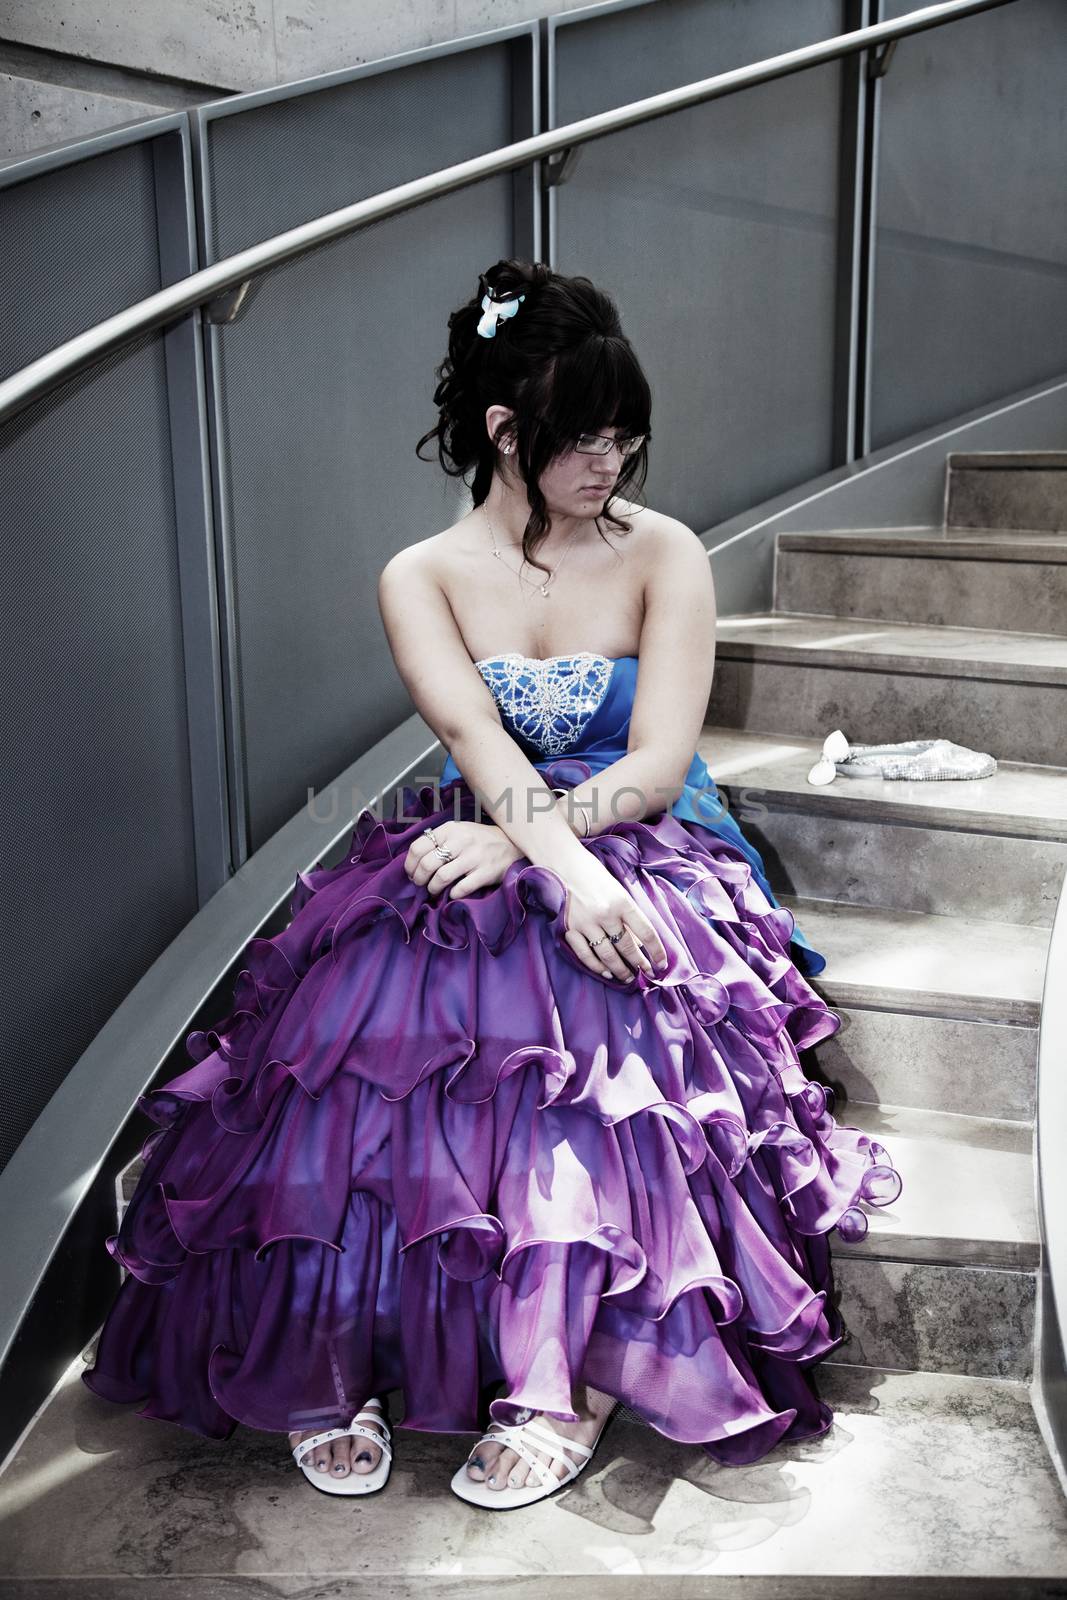 A young girl sits alone in her prom dress on a lonely flight of stairs.